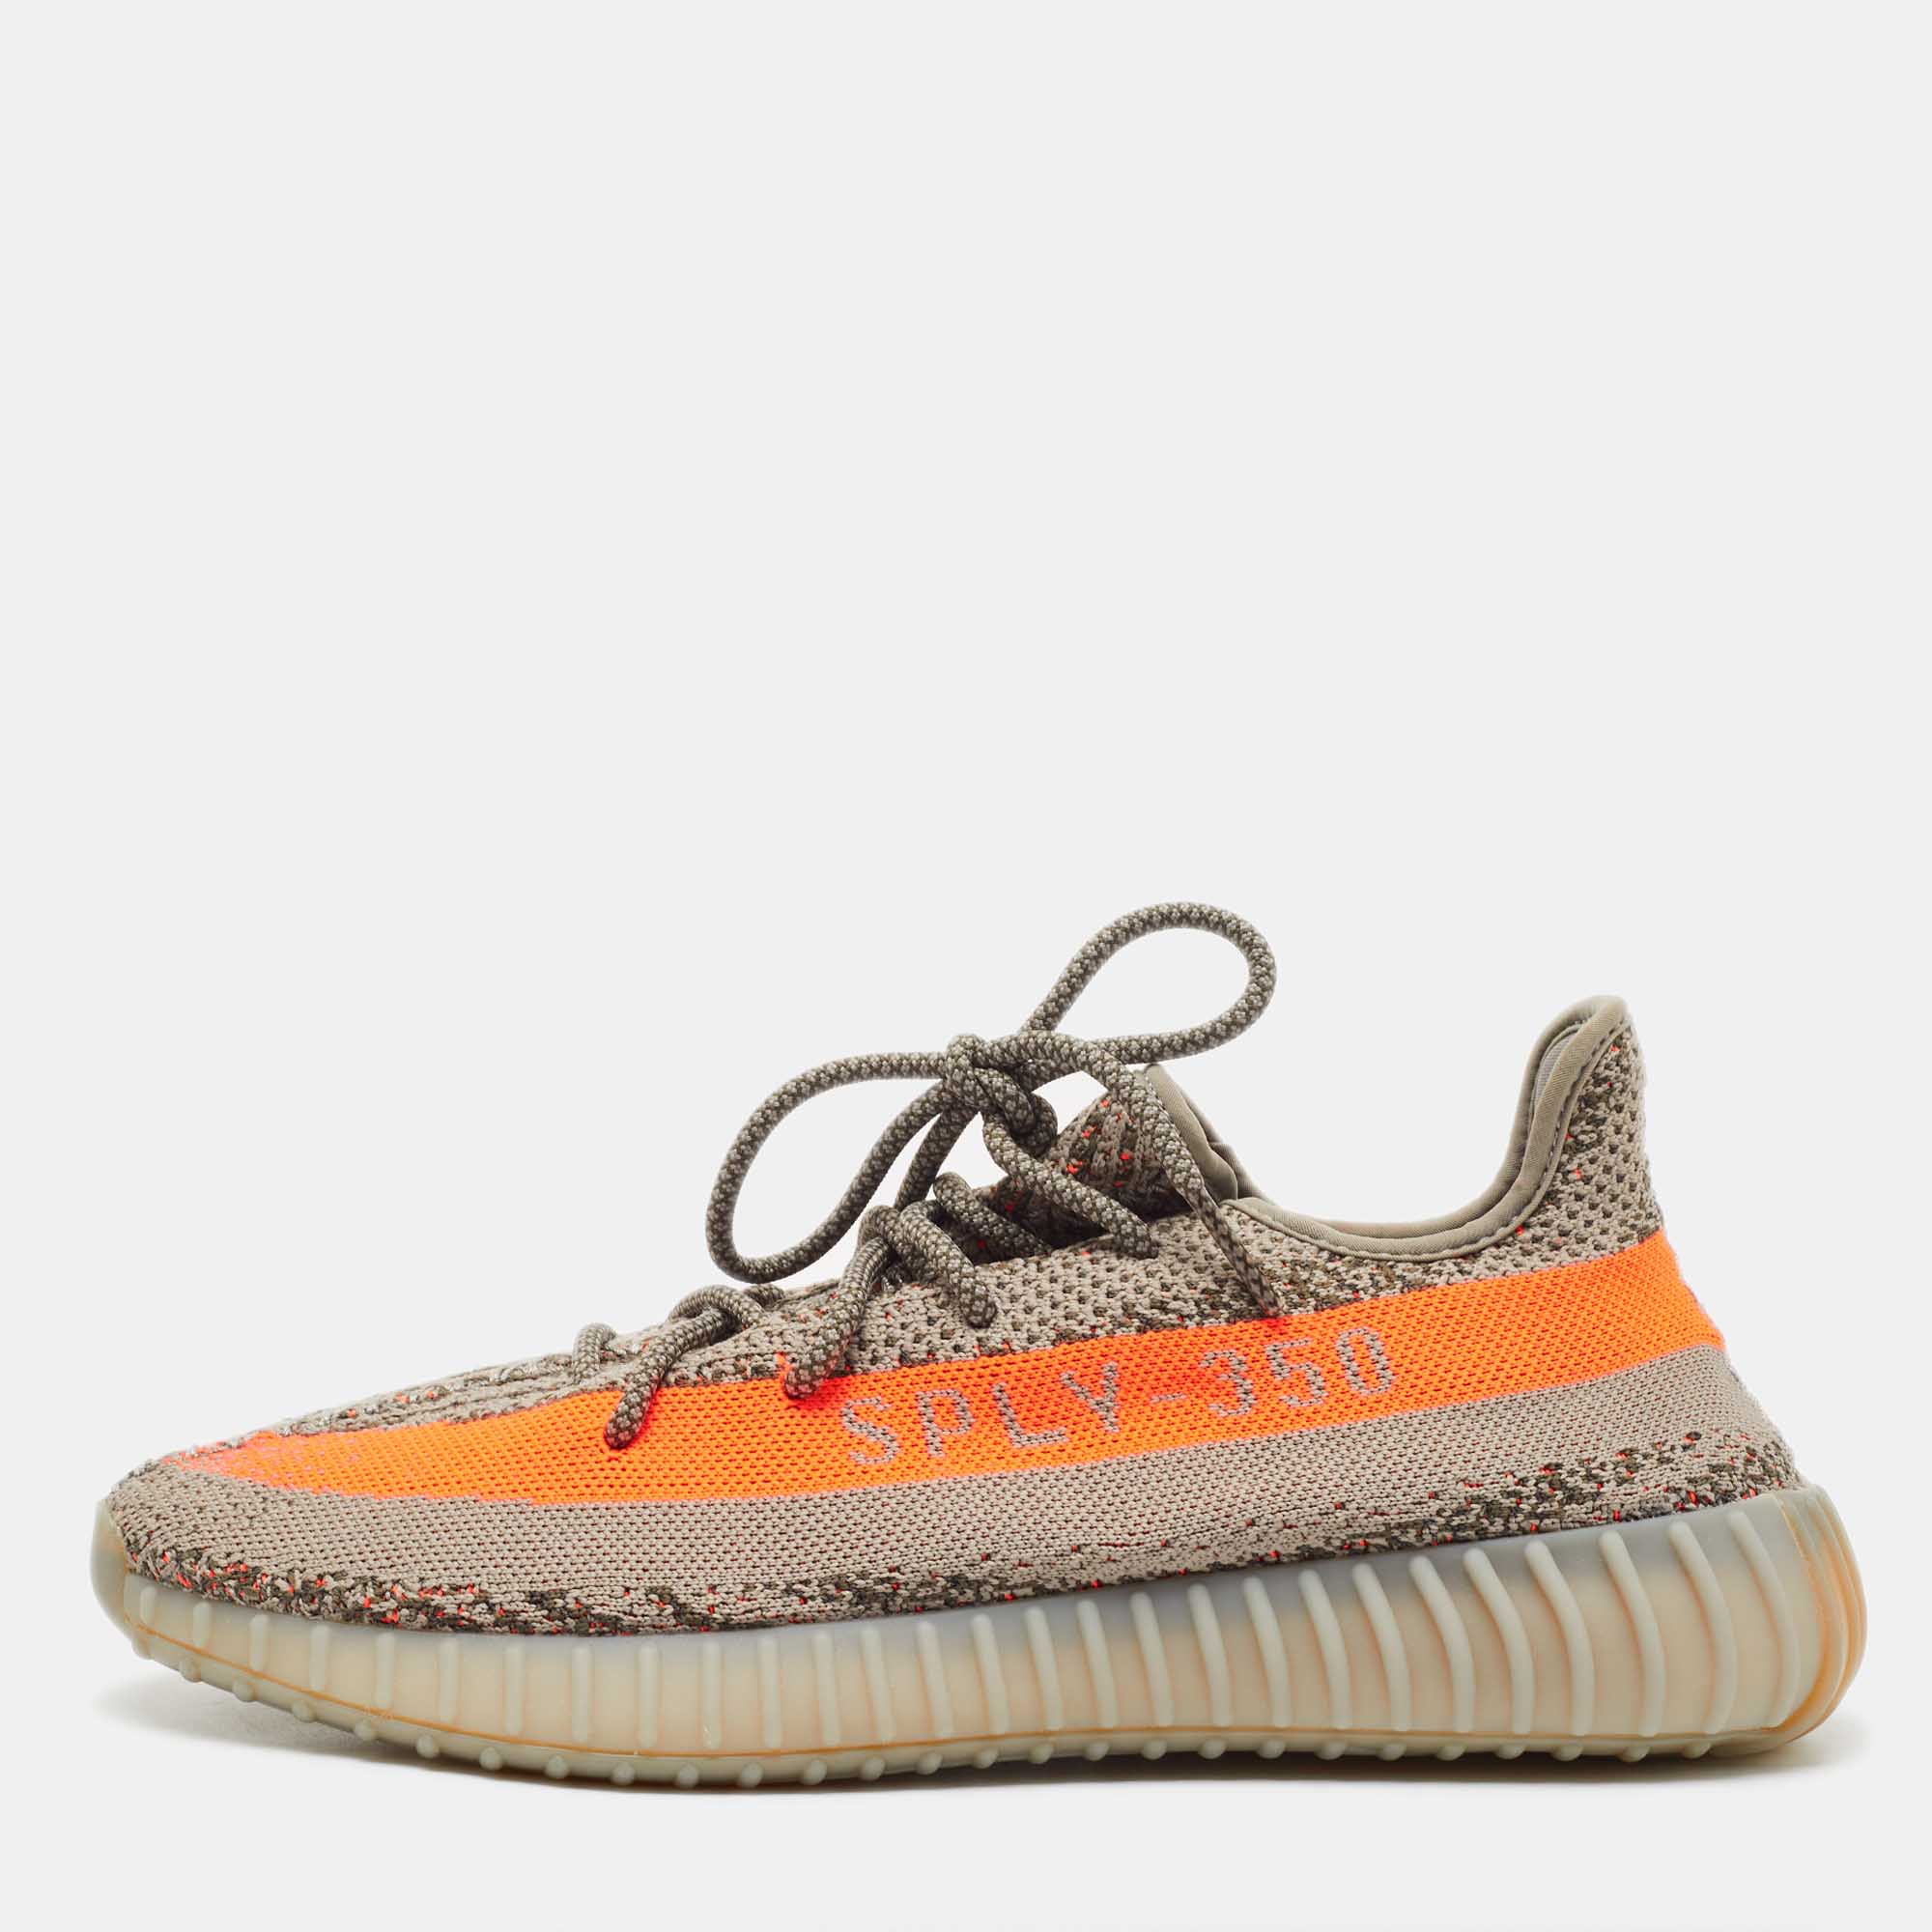 Pre-owned Yeezy X Adidas Grey/neon Orange Knit Fabric Boost 350 V2 Beluga Reflective Sneakers Size 47 1/3